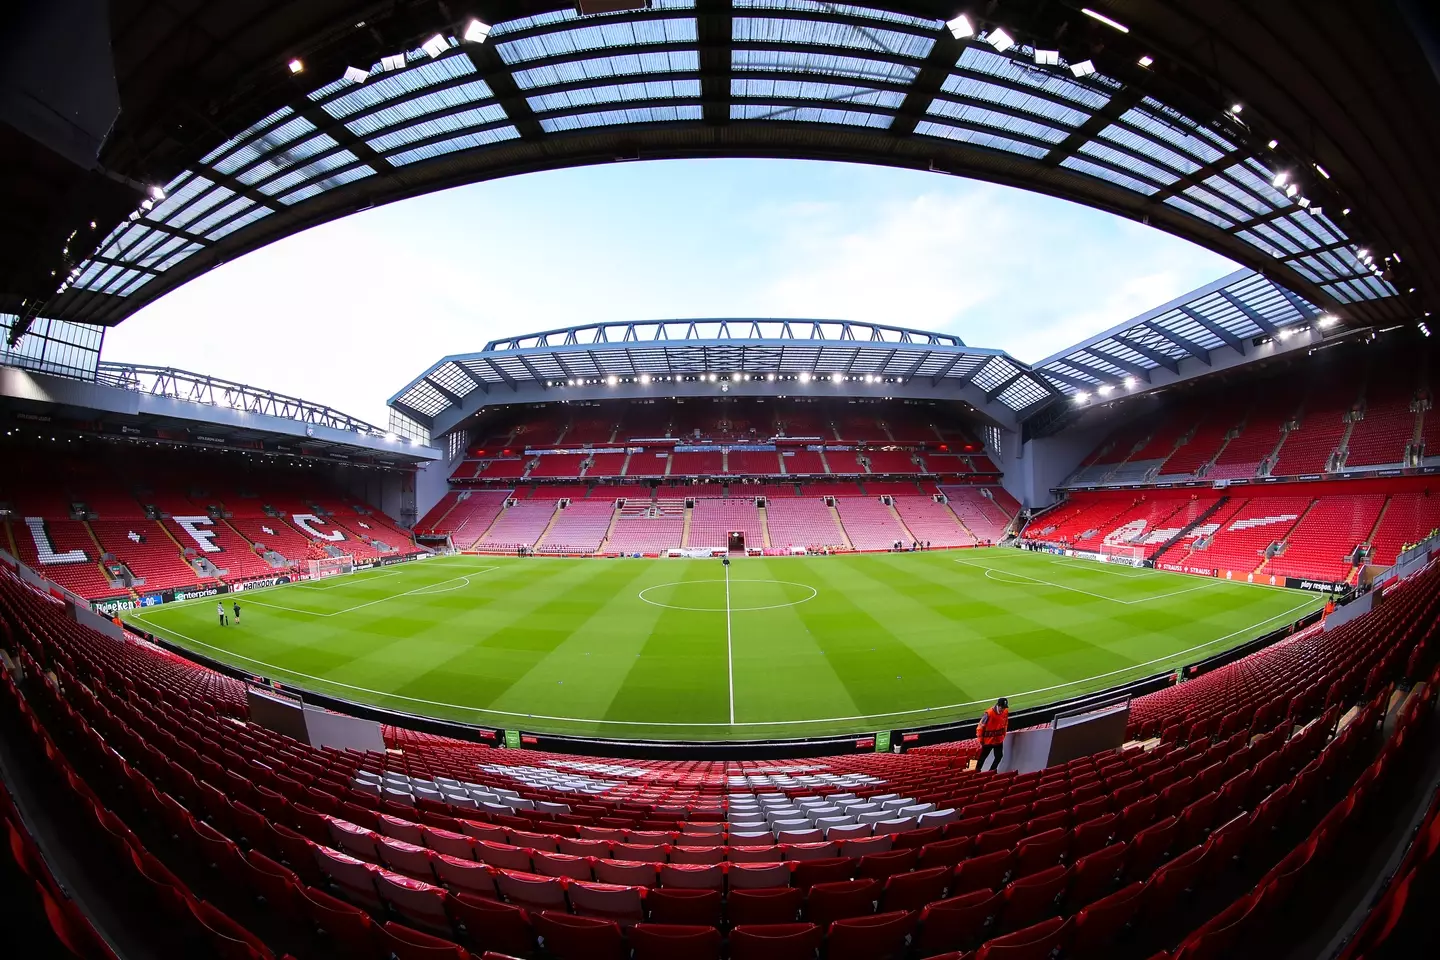 Anfield has undergone an expansion in the past few years, with more work expected. (